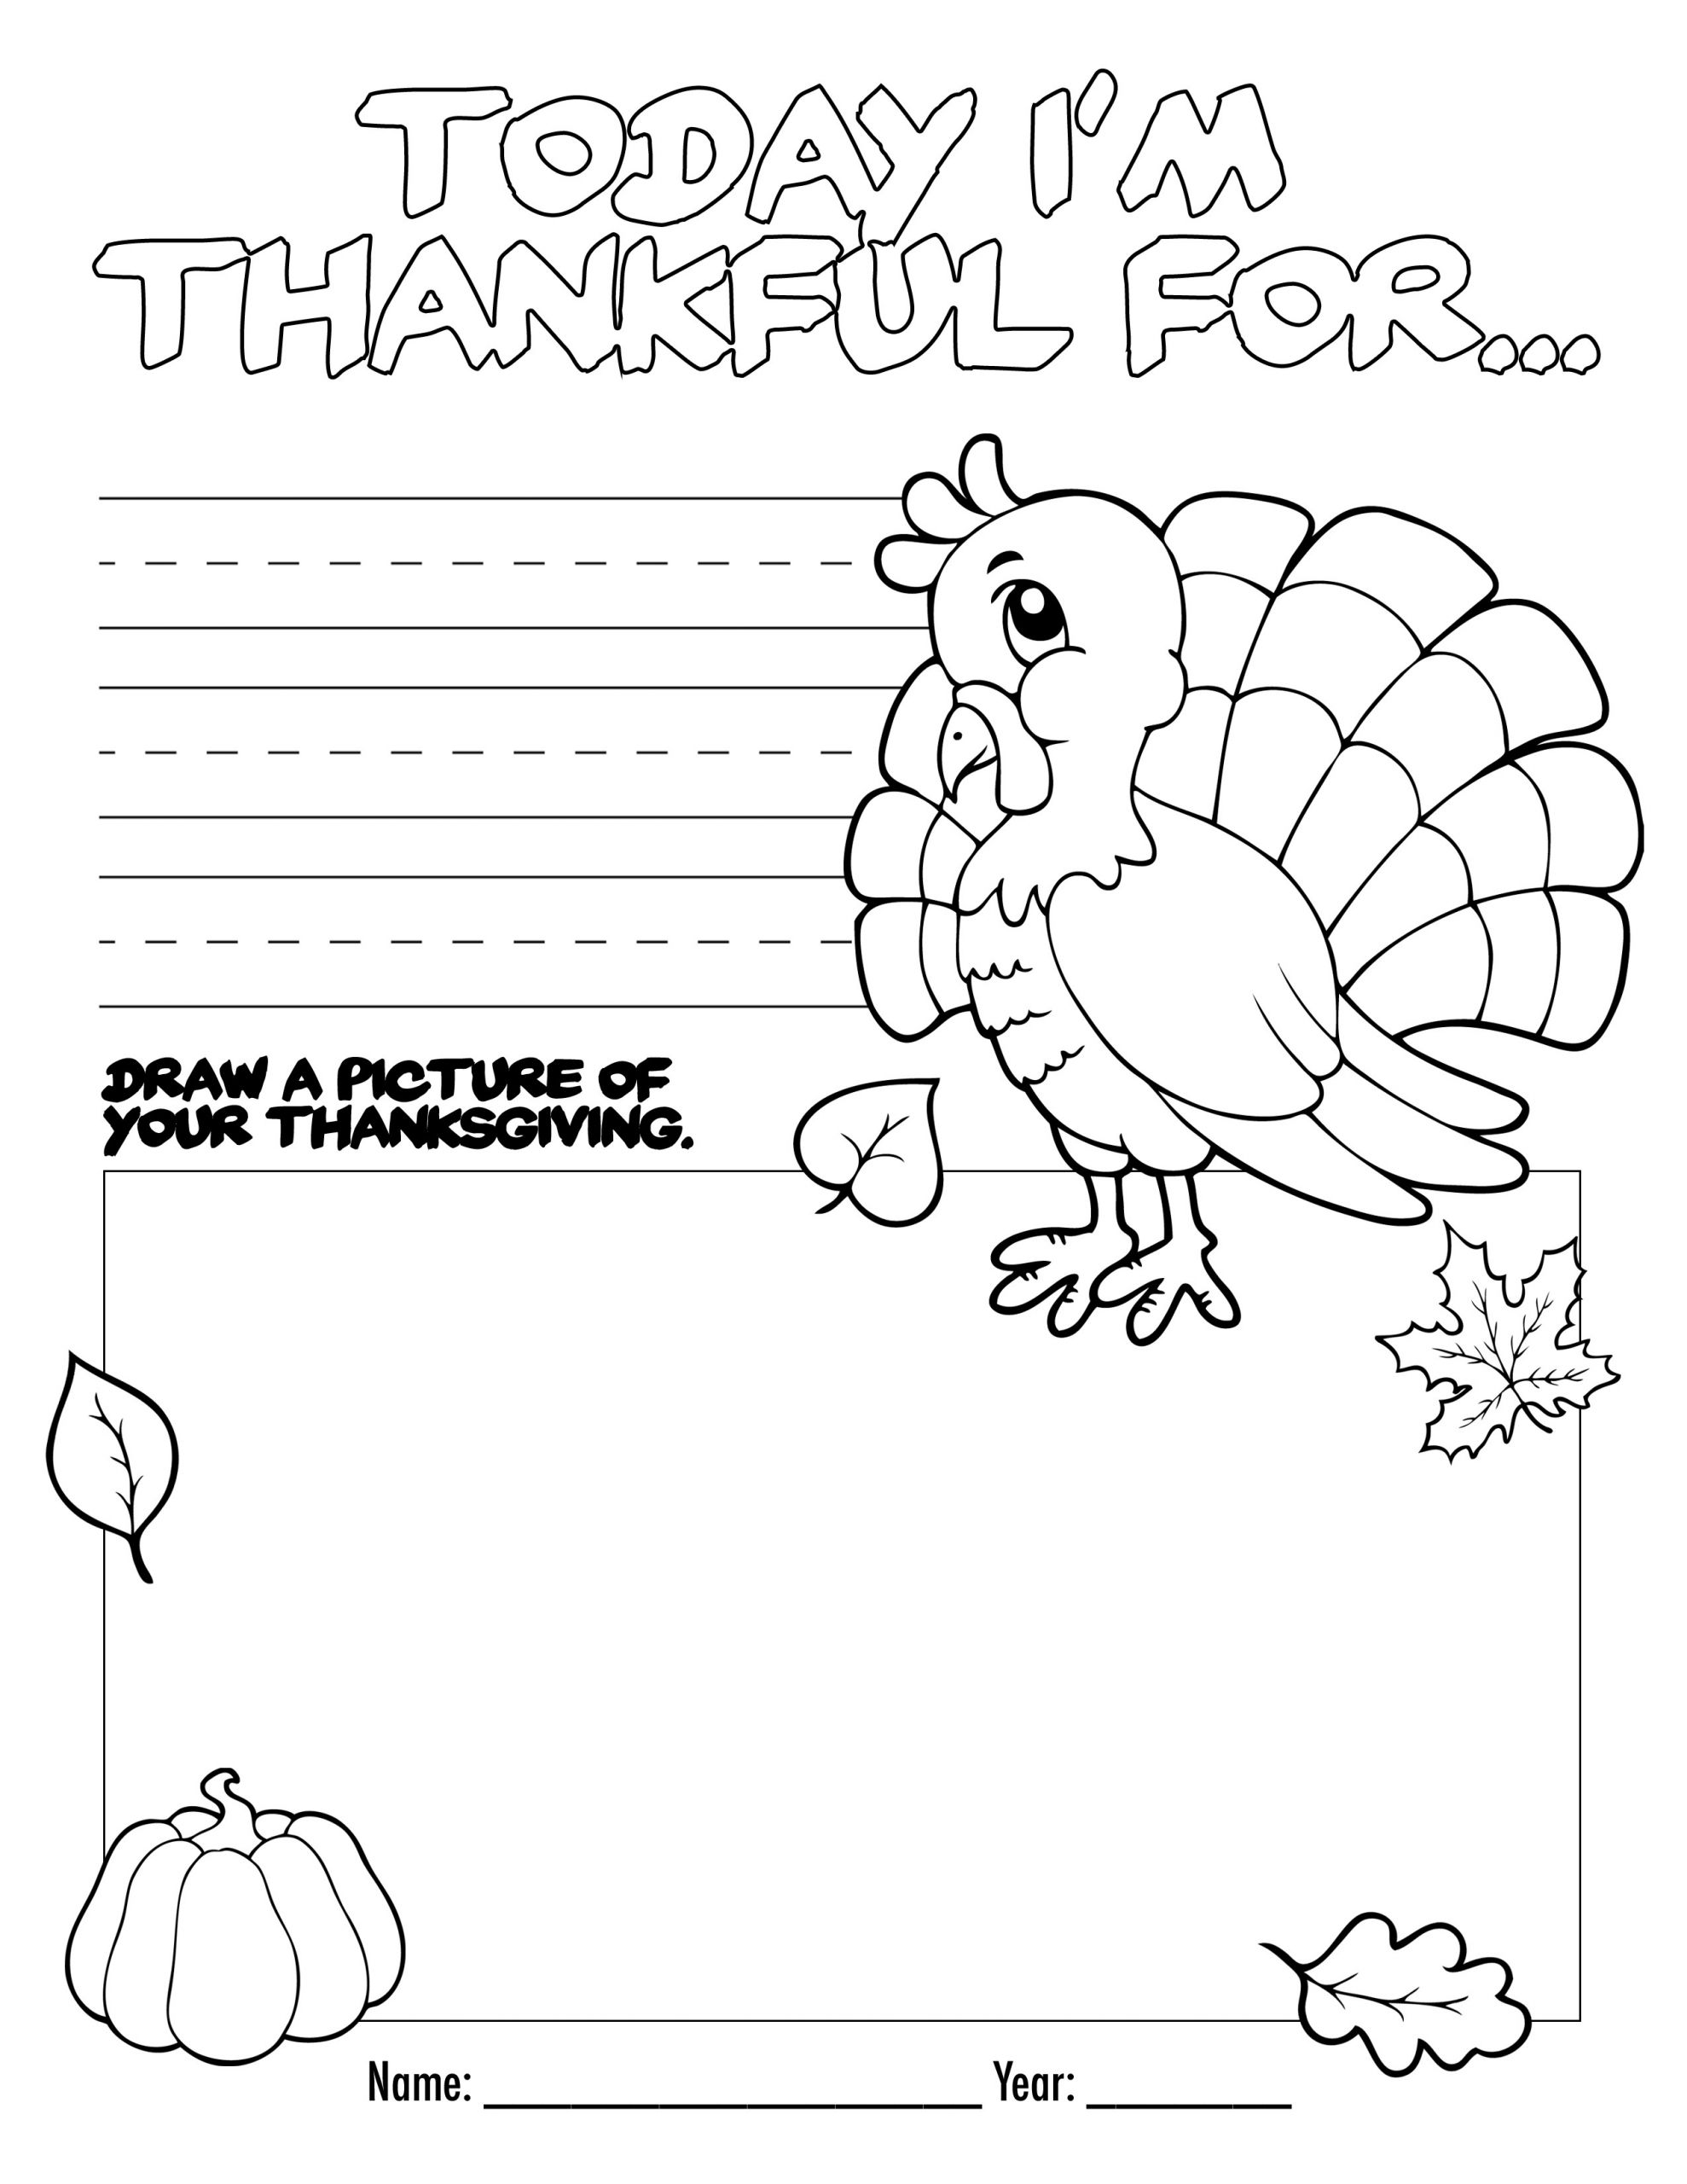 Coloring Pages For Kids Thanksgiving
 Thanksgiving Coloring Book Free Printable for the Kids